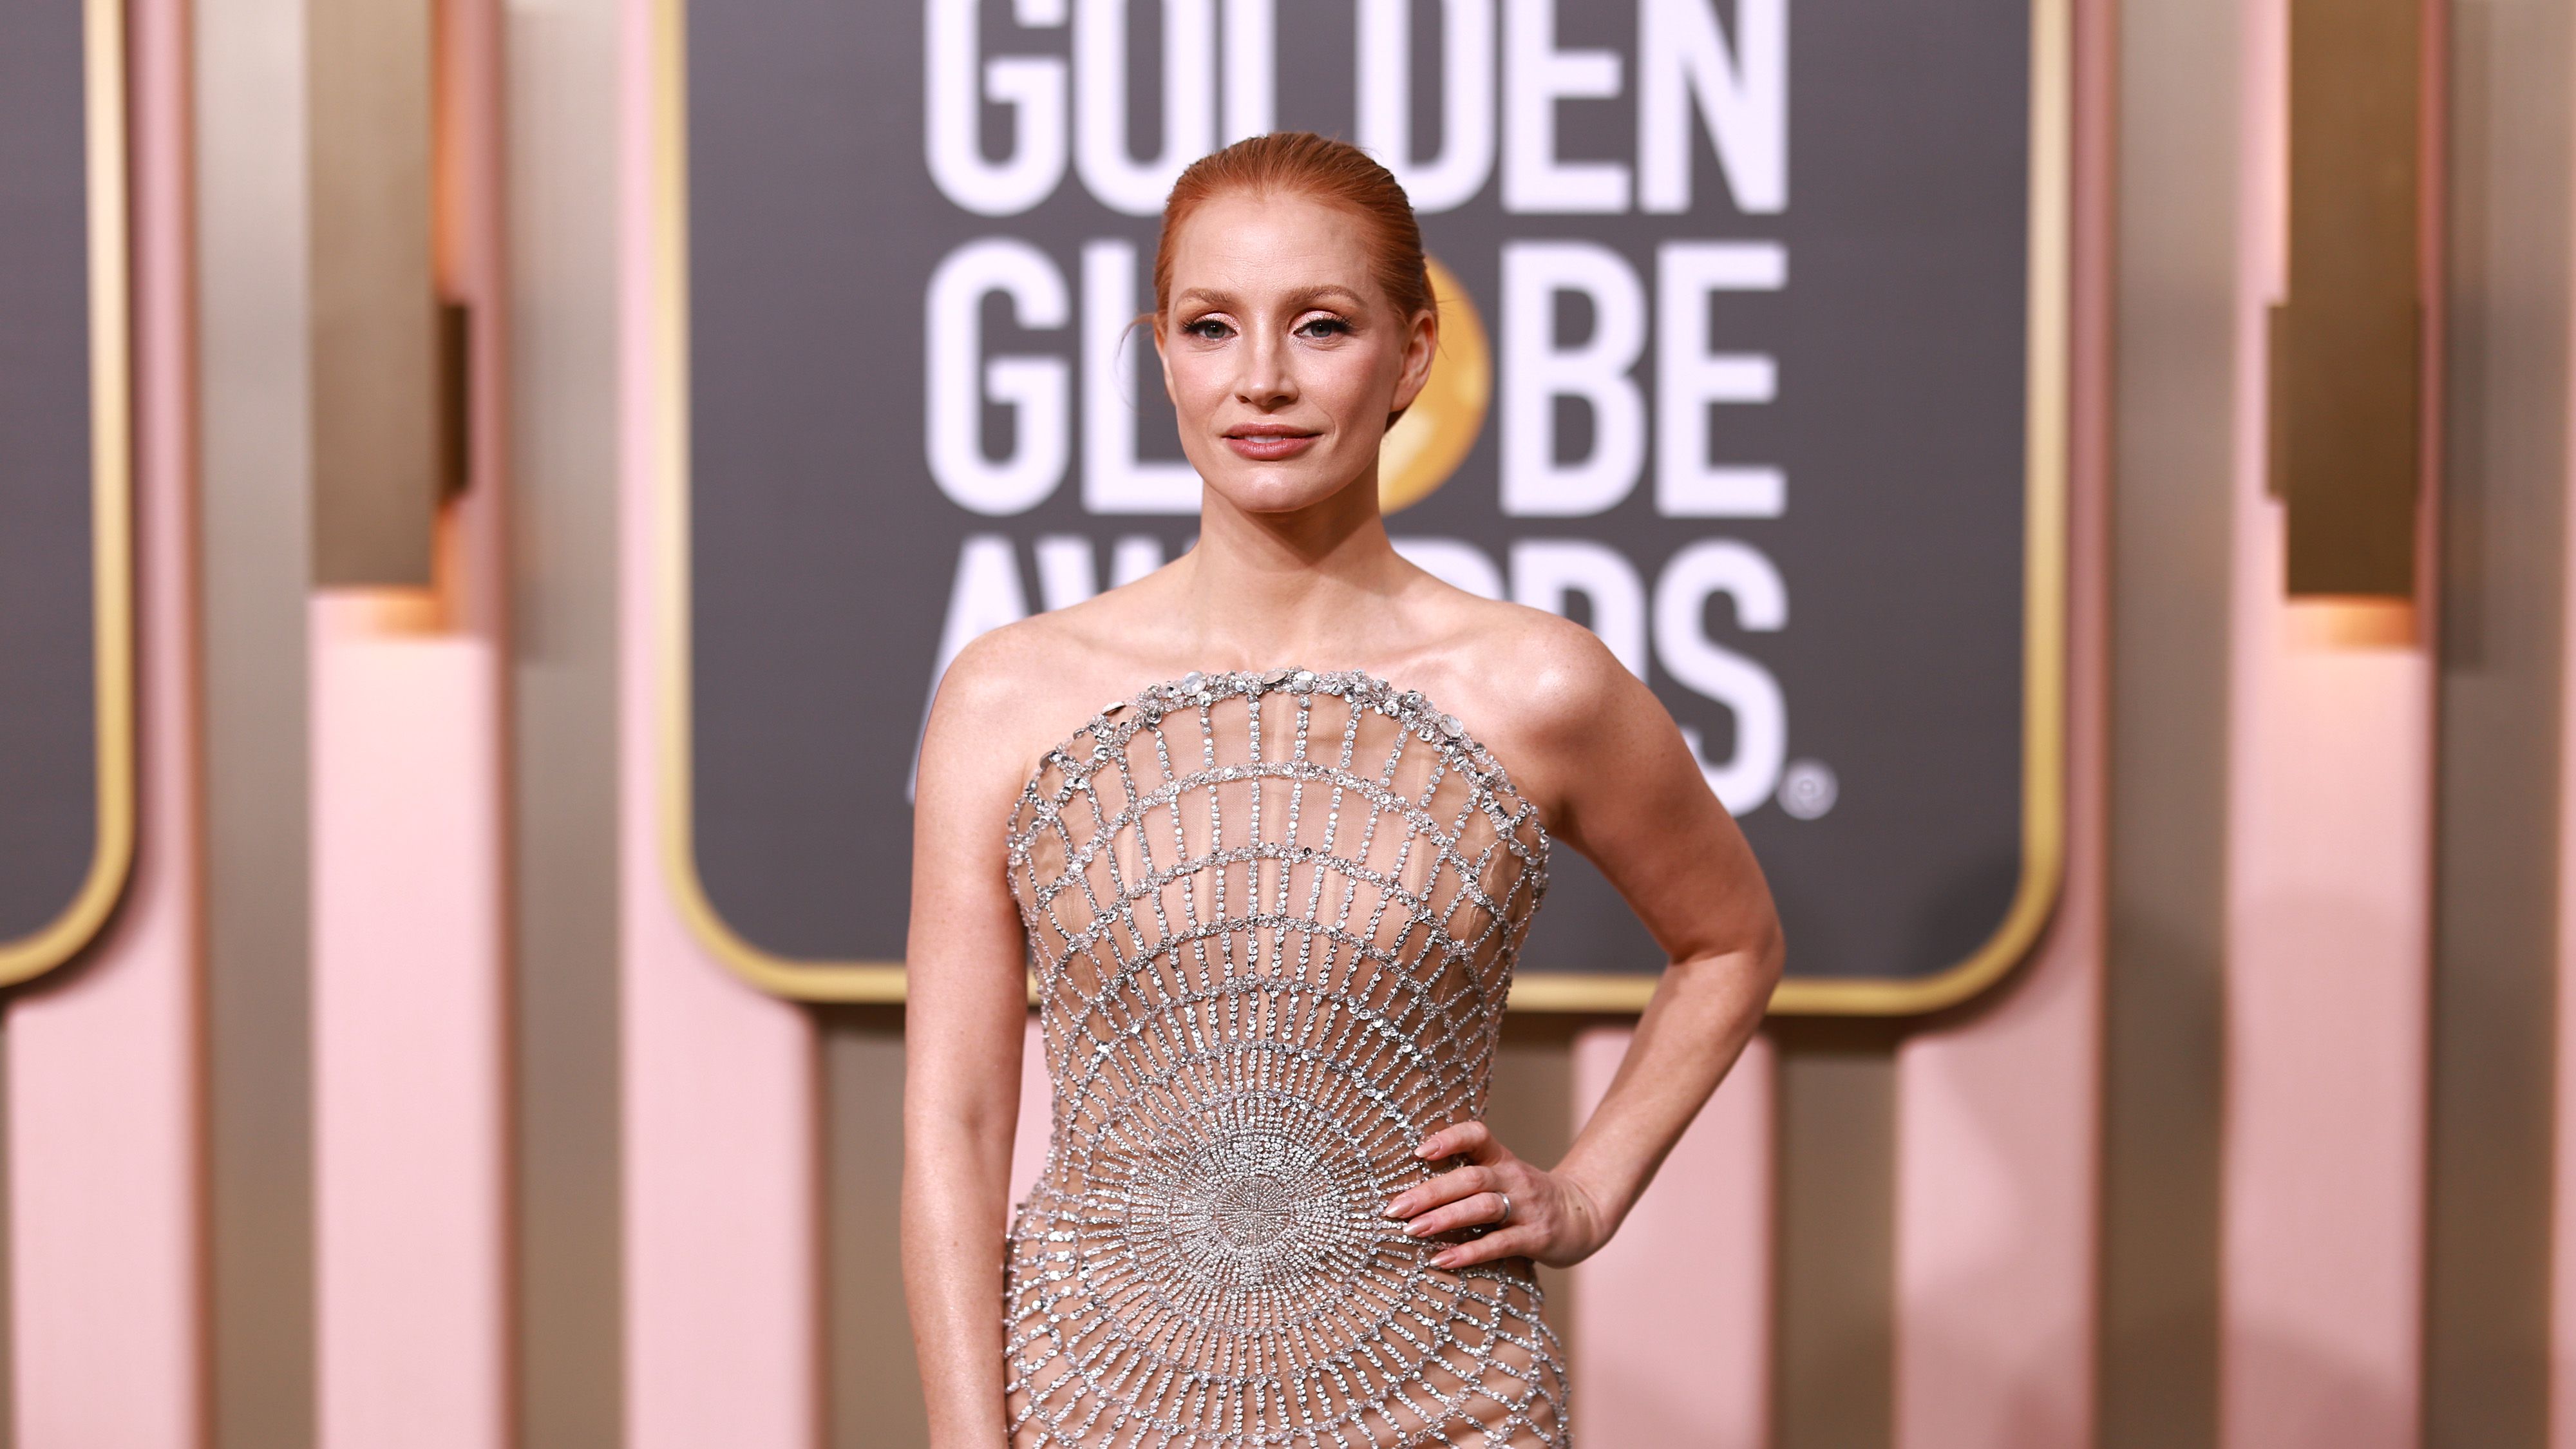 See Jessica Chastain Stun at the Golden Globes in a Jaw-Dropping Nude Dress